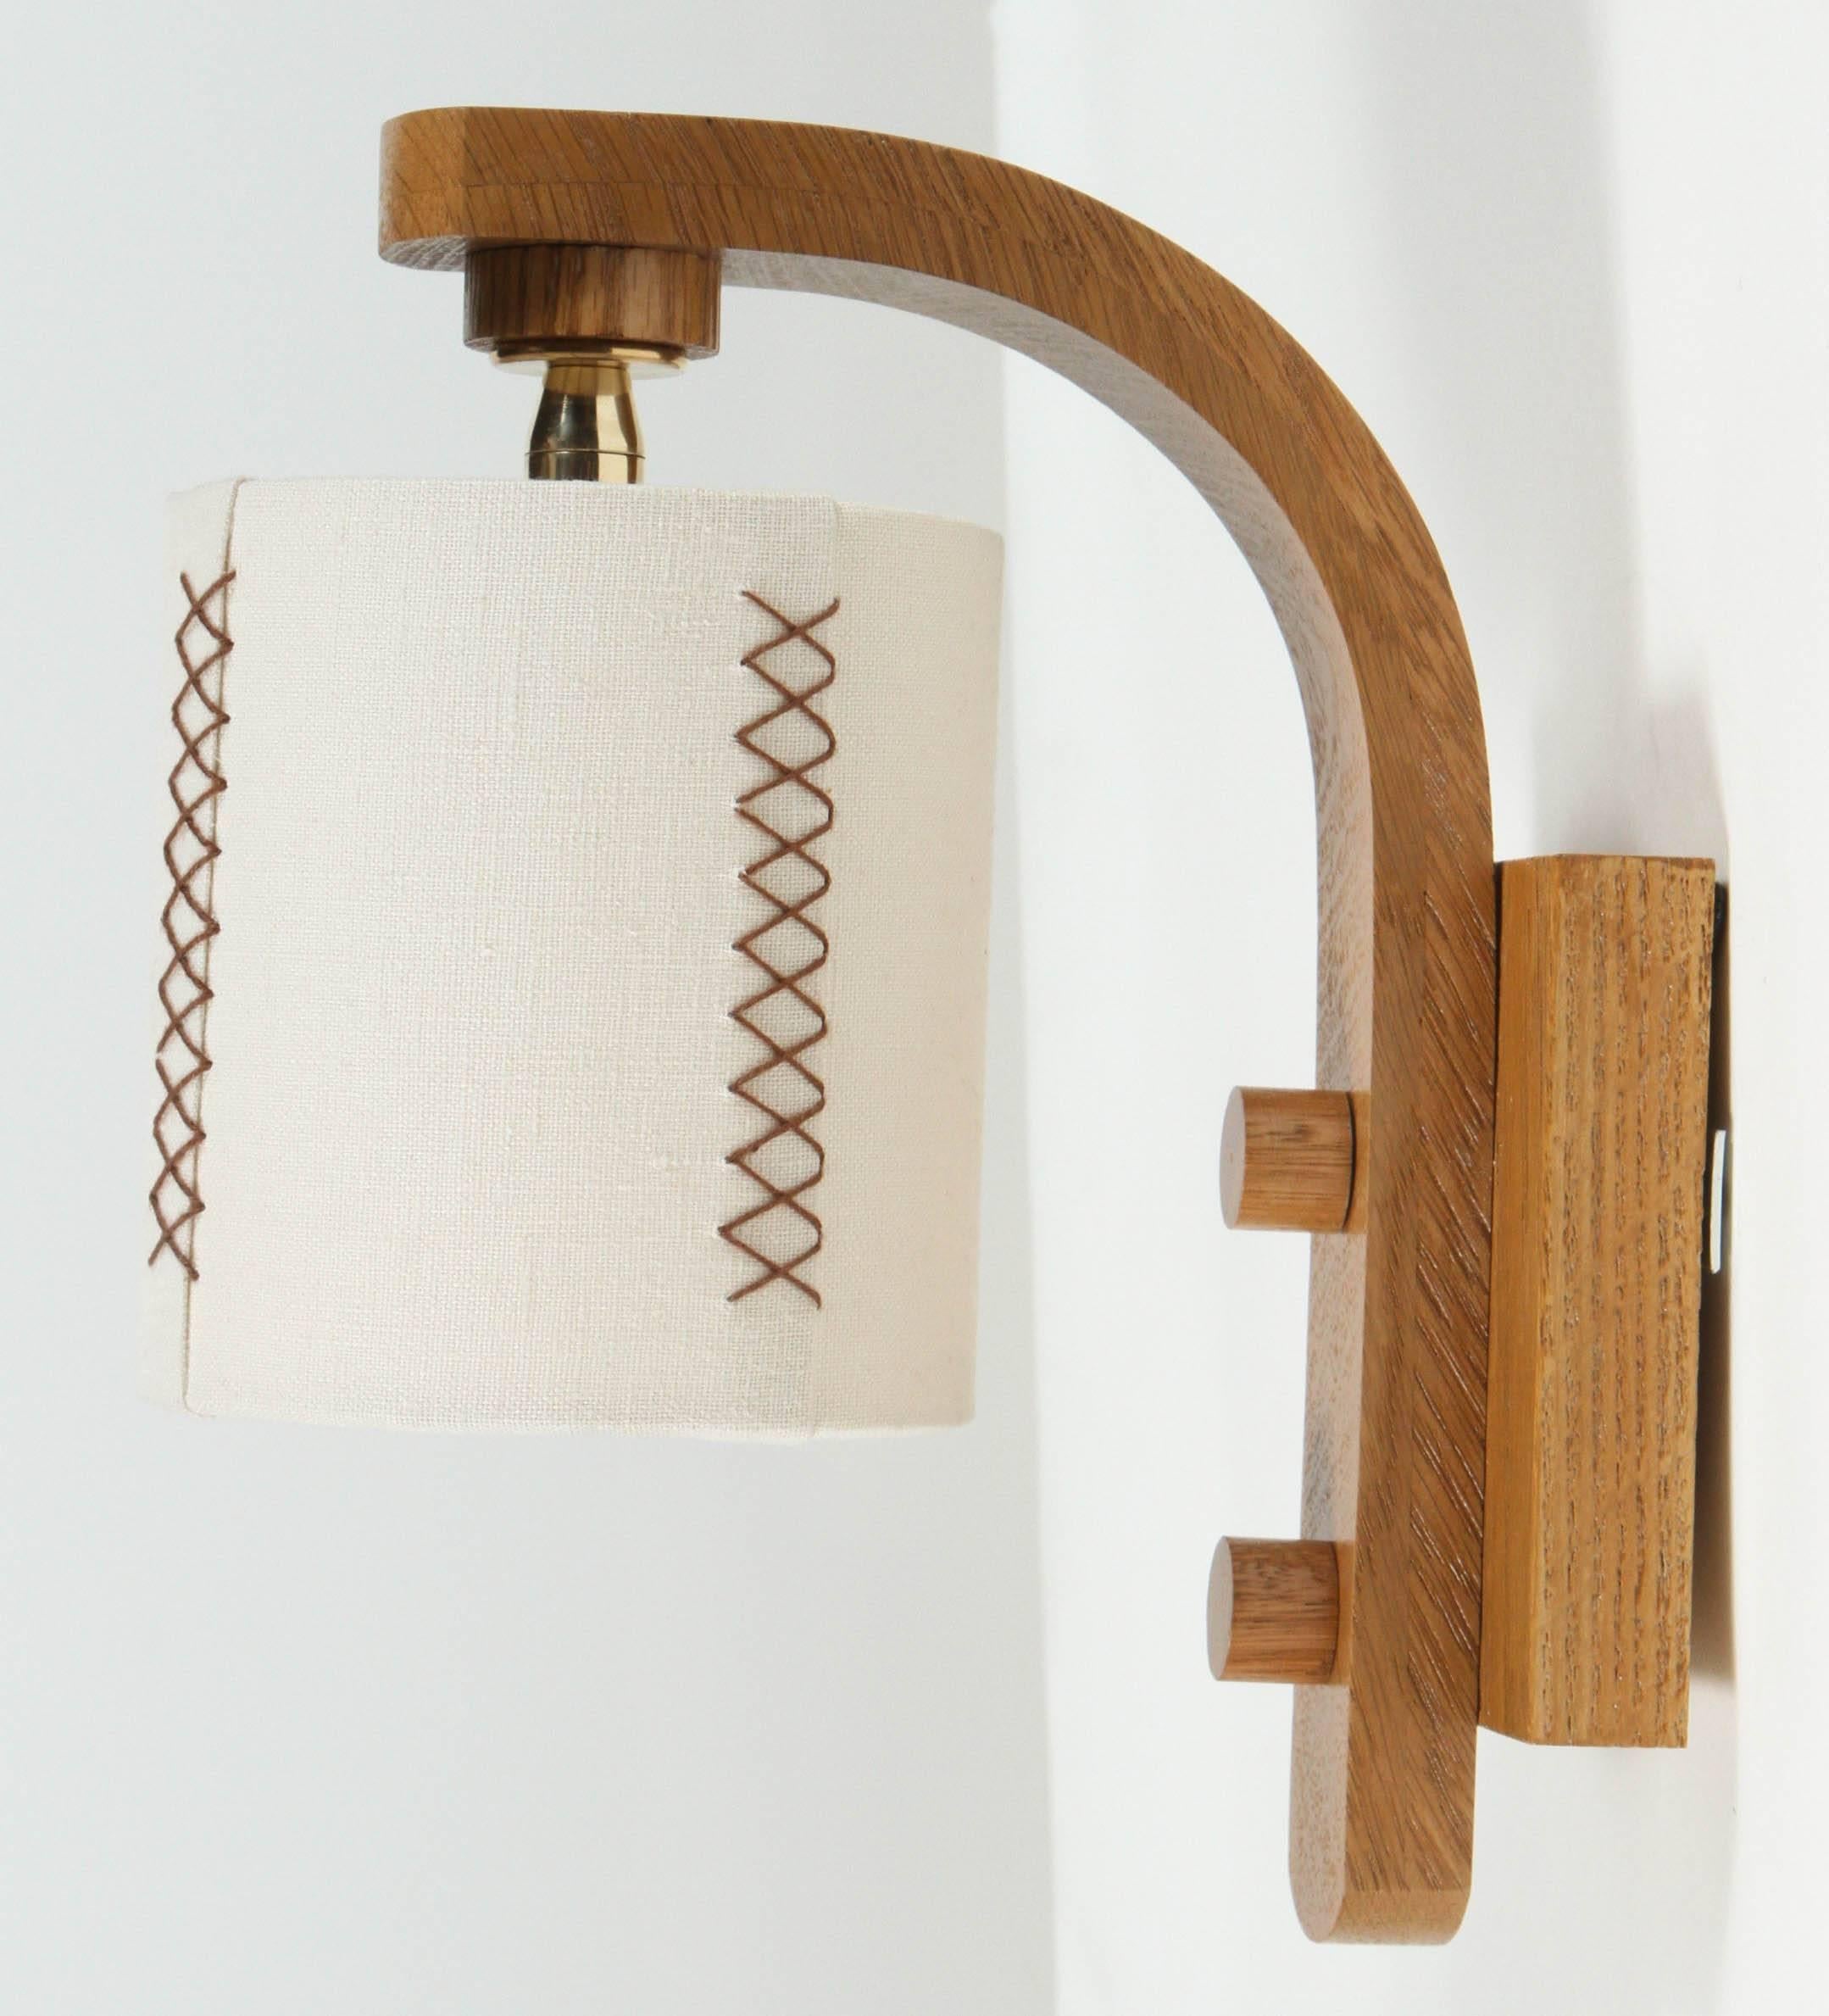 Paul Marra Oak Sconce in natural stained finish with hand-stitched linen shade. By order. 

Back plate 4in.W x 4.75in.H, diameter of shade is 4.5in.W; overall dimensions are 4.5in.W x 8.5in. projection x 10.25H.

